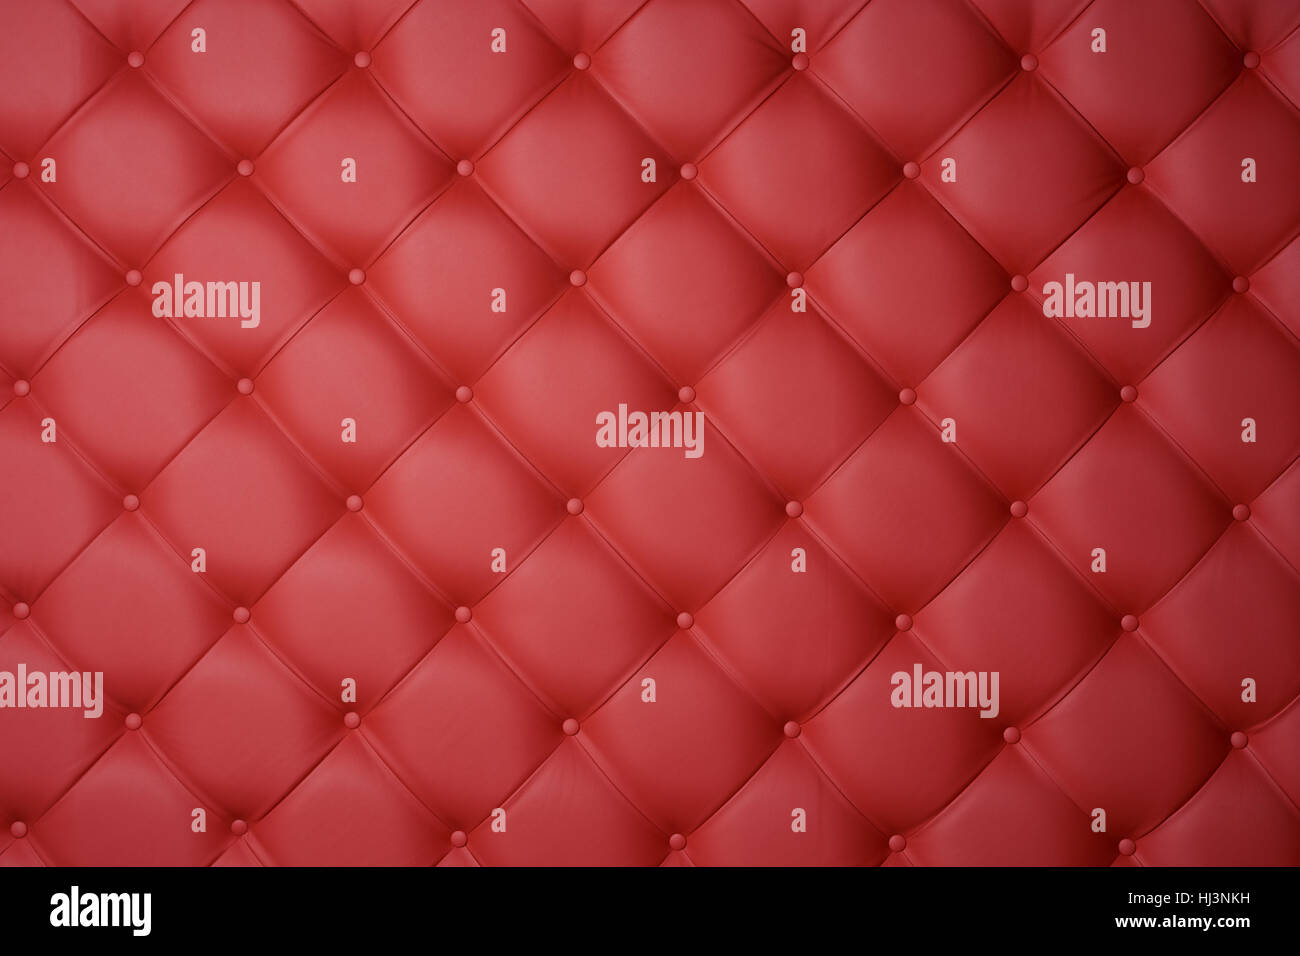 Red leather carriage upholstery as a background. Stock Photo